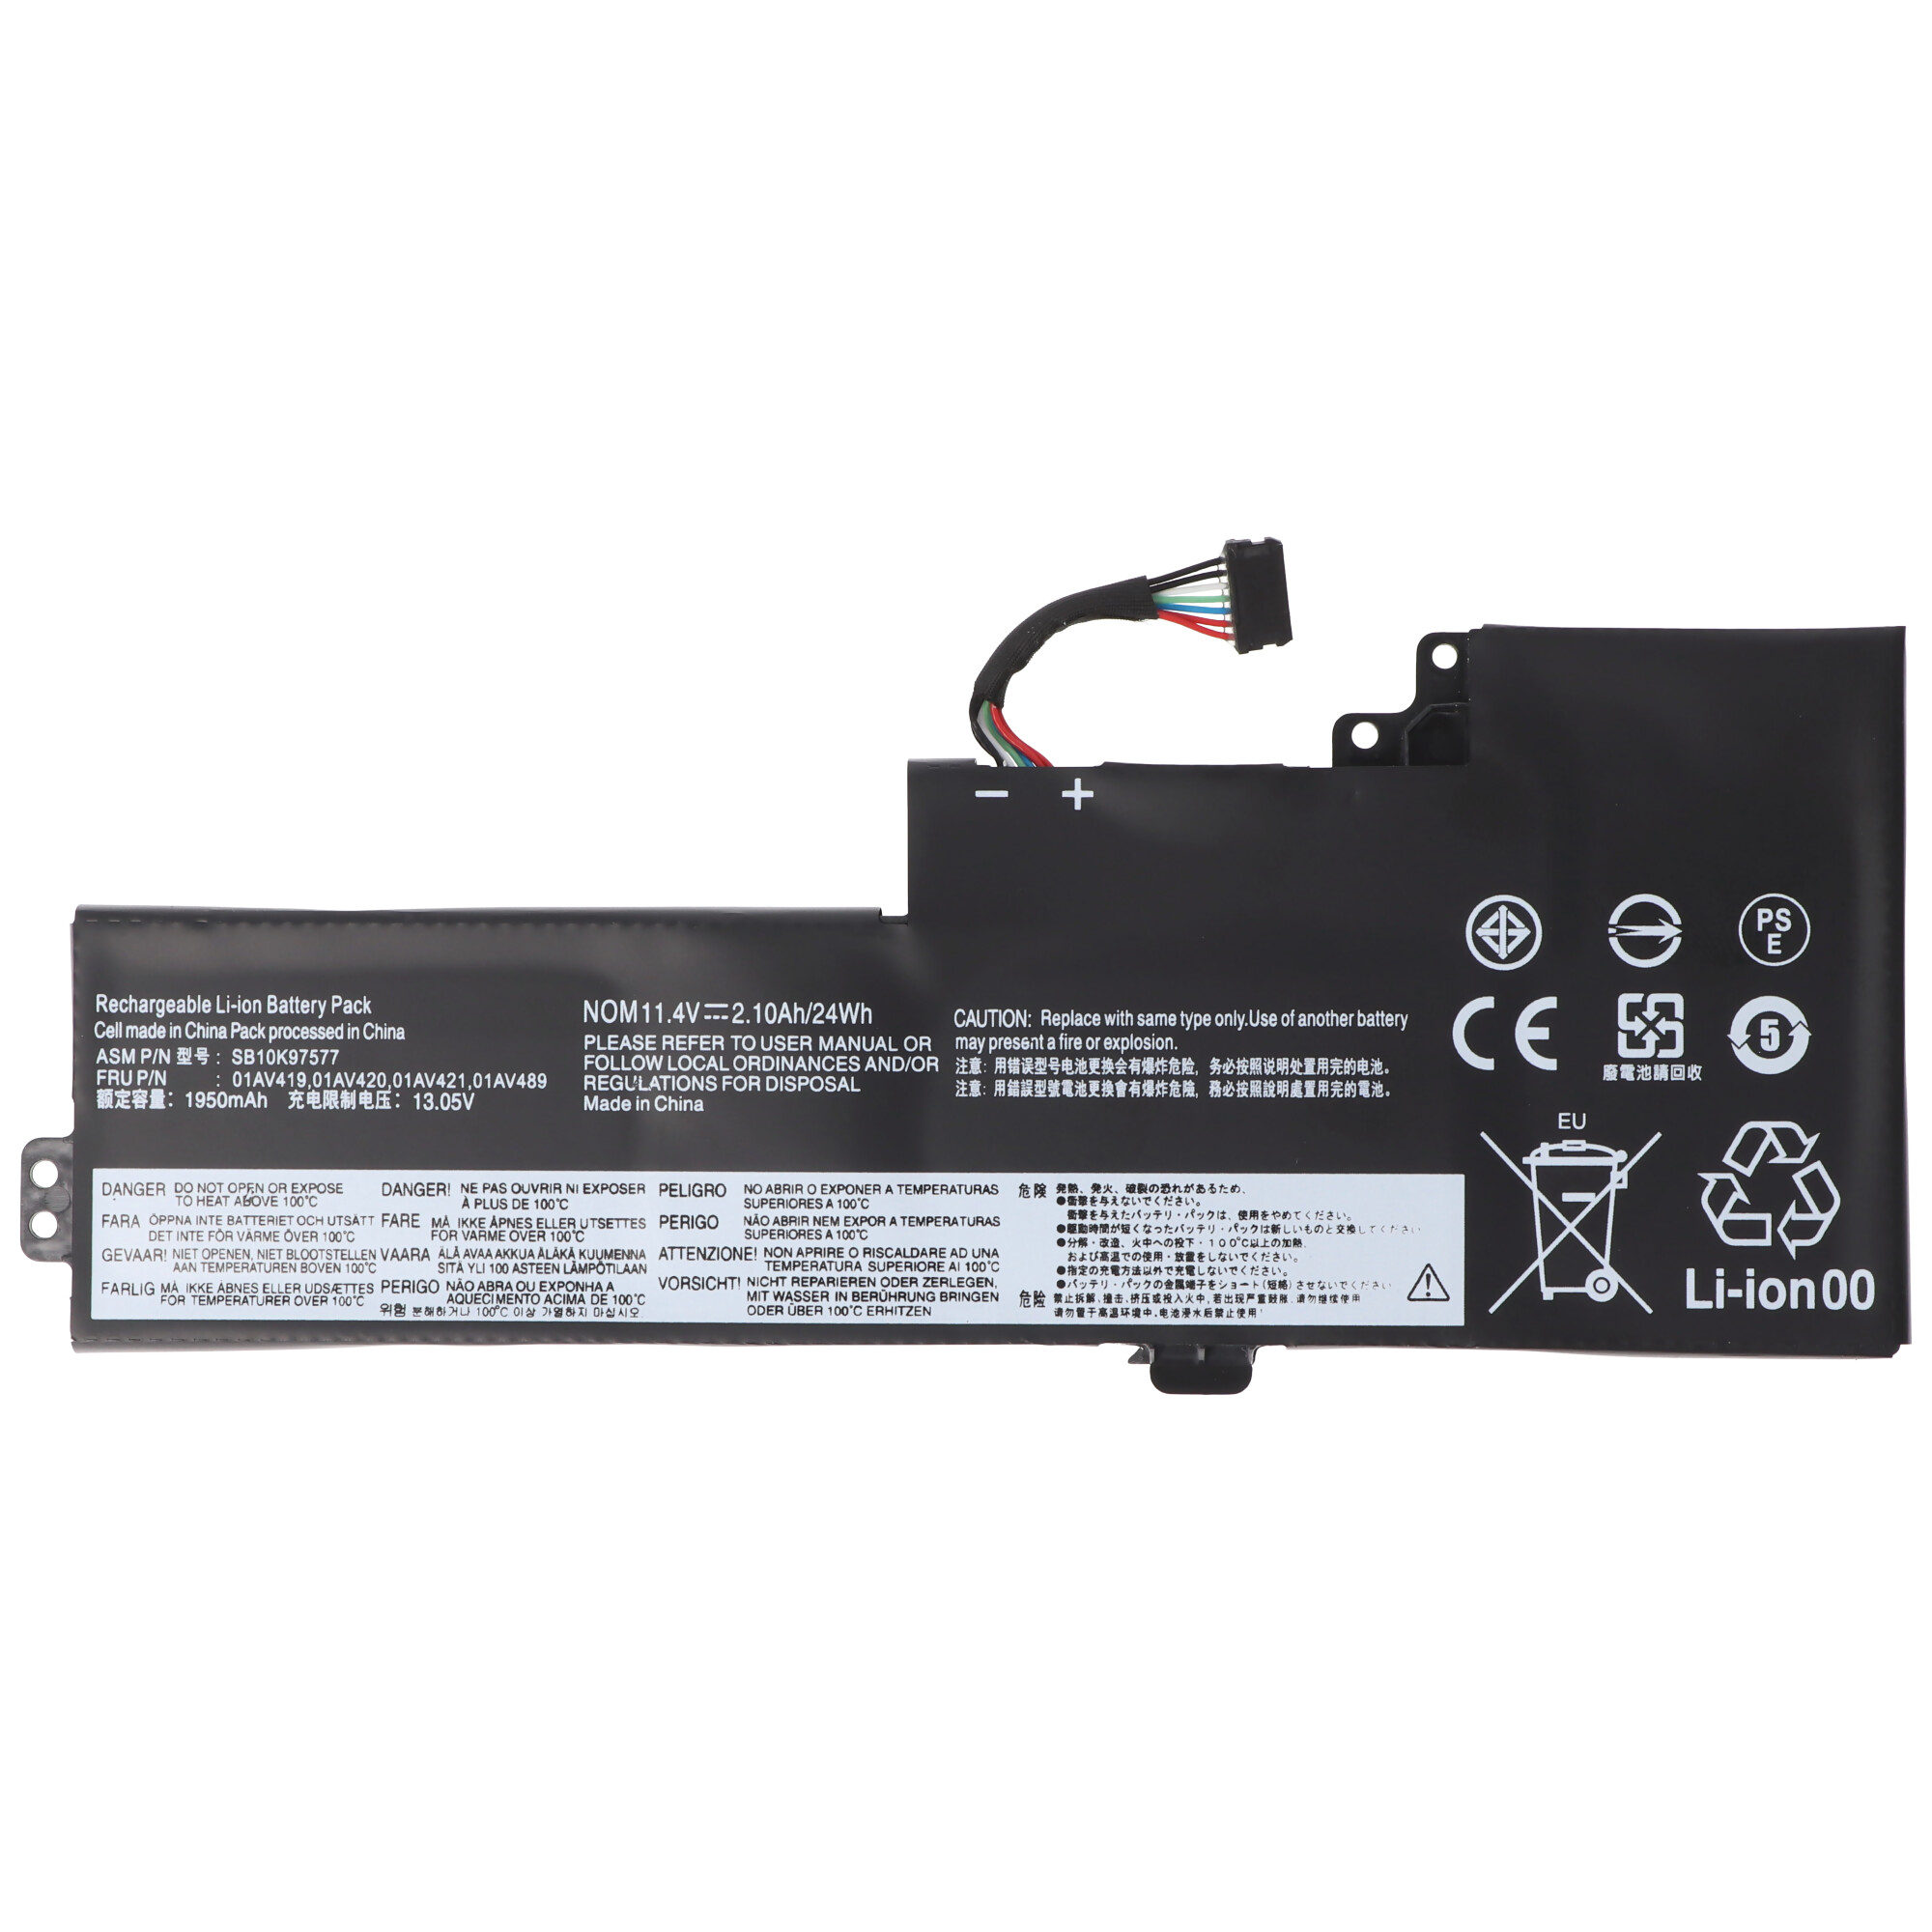 Akku passend für Lenovo ThinkPad T480, Li-Polymer, 11,4V, 2100mAh, 24Wh - internal - Please check in advance which battery is needed, because there is also an external battery!